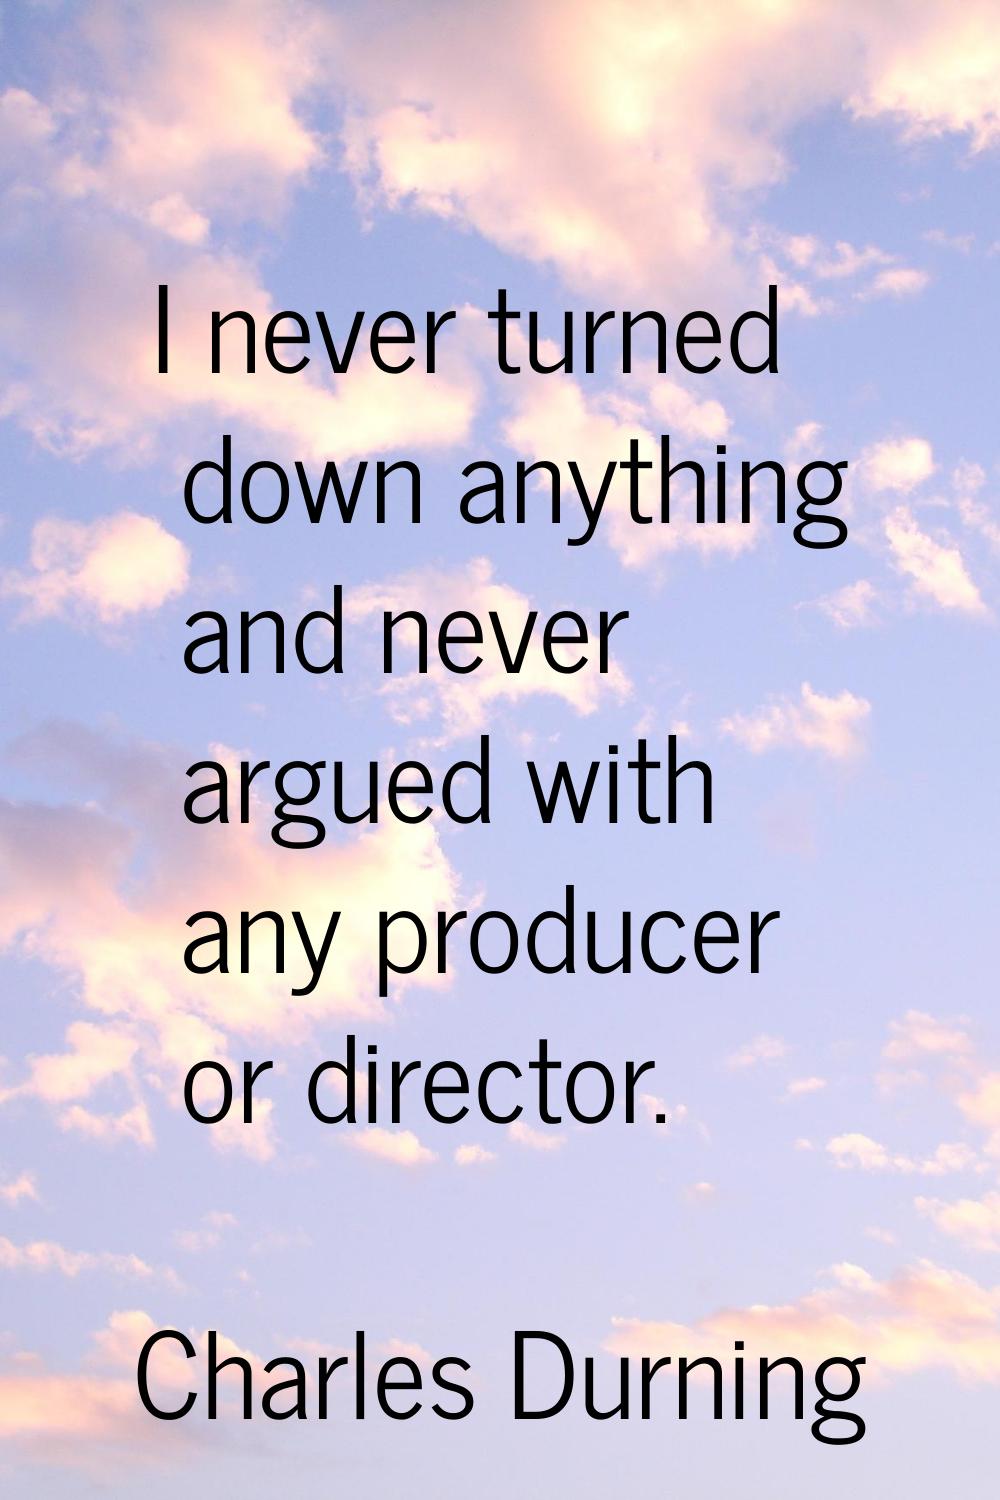 I never turned down anything and never argued with any producer or director.